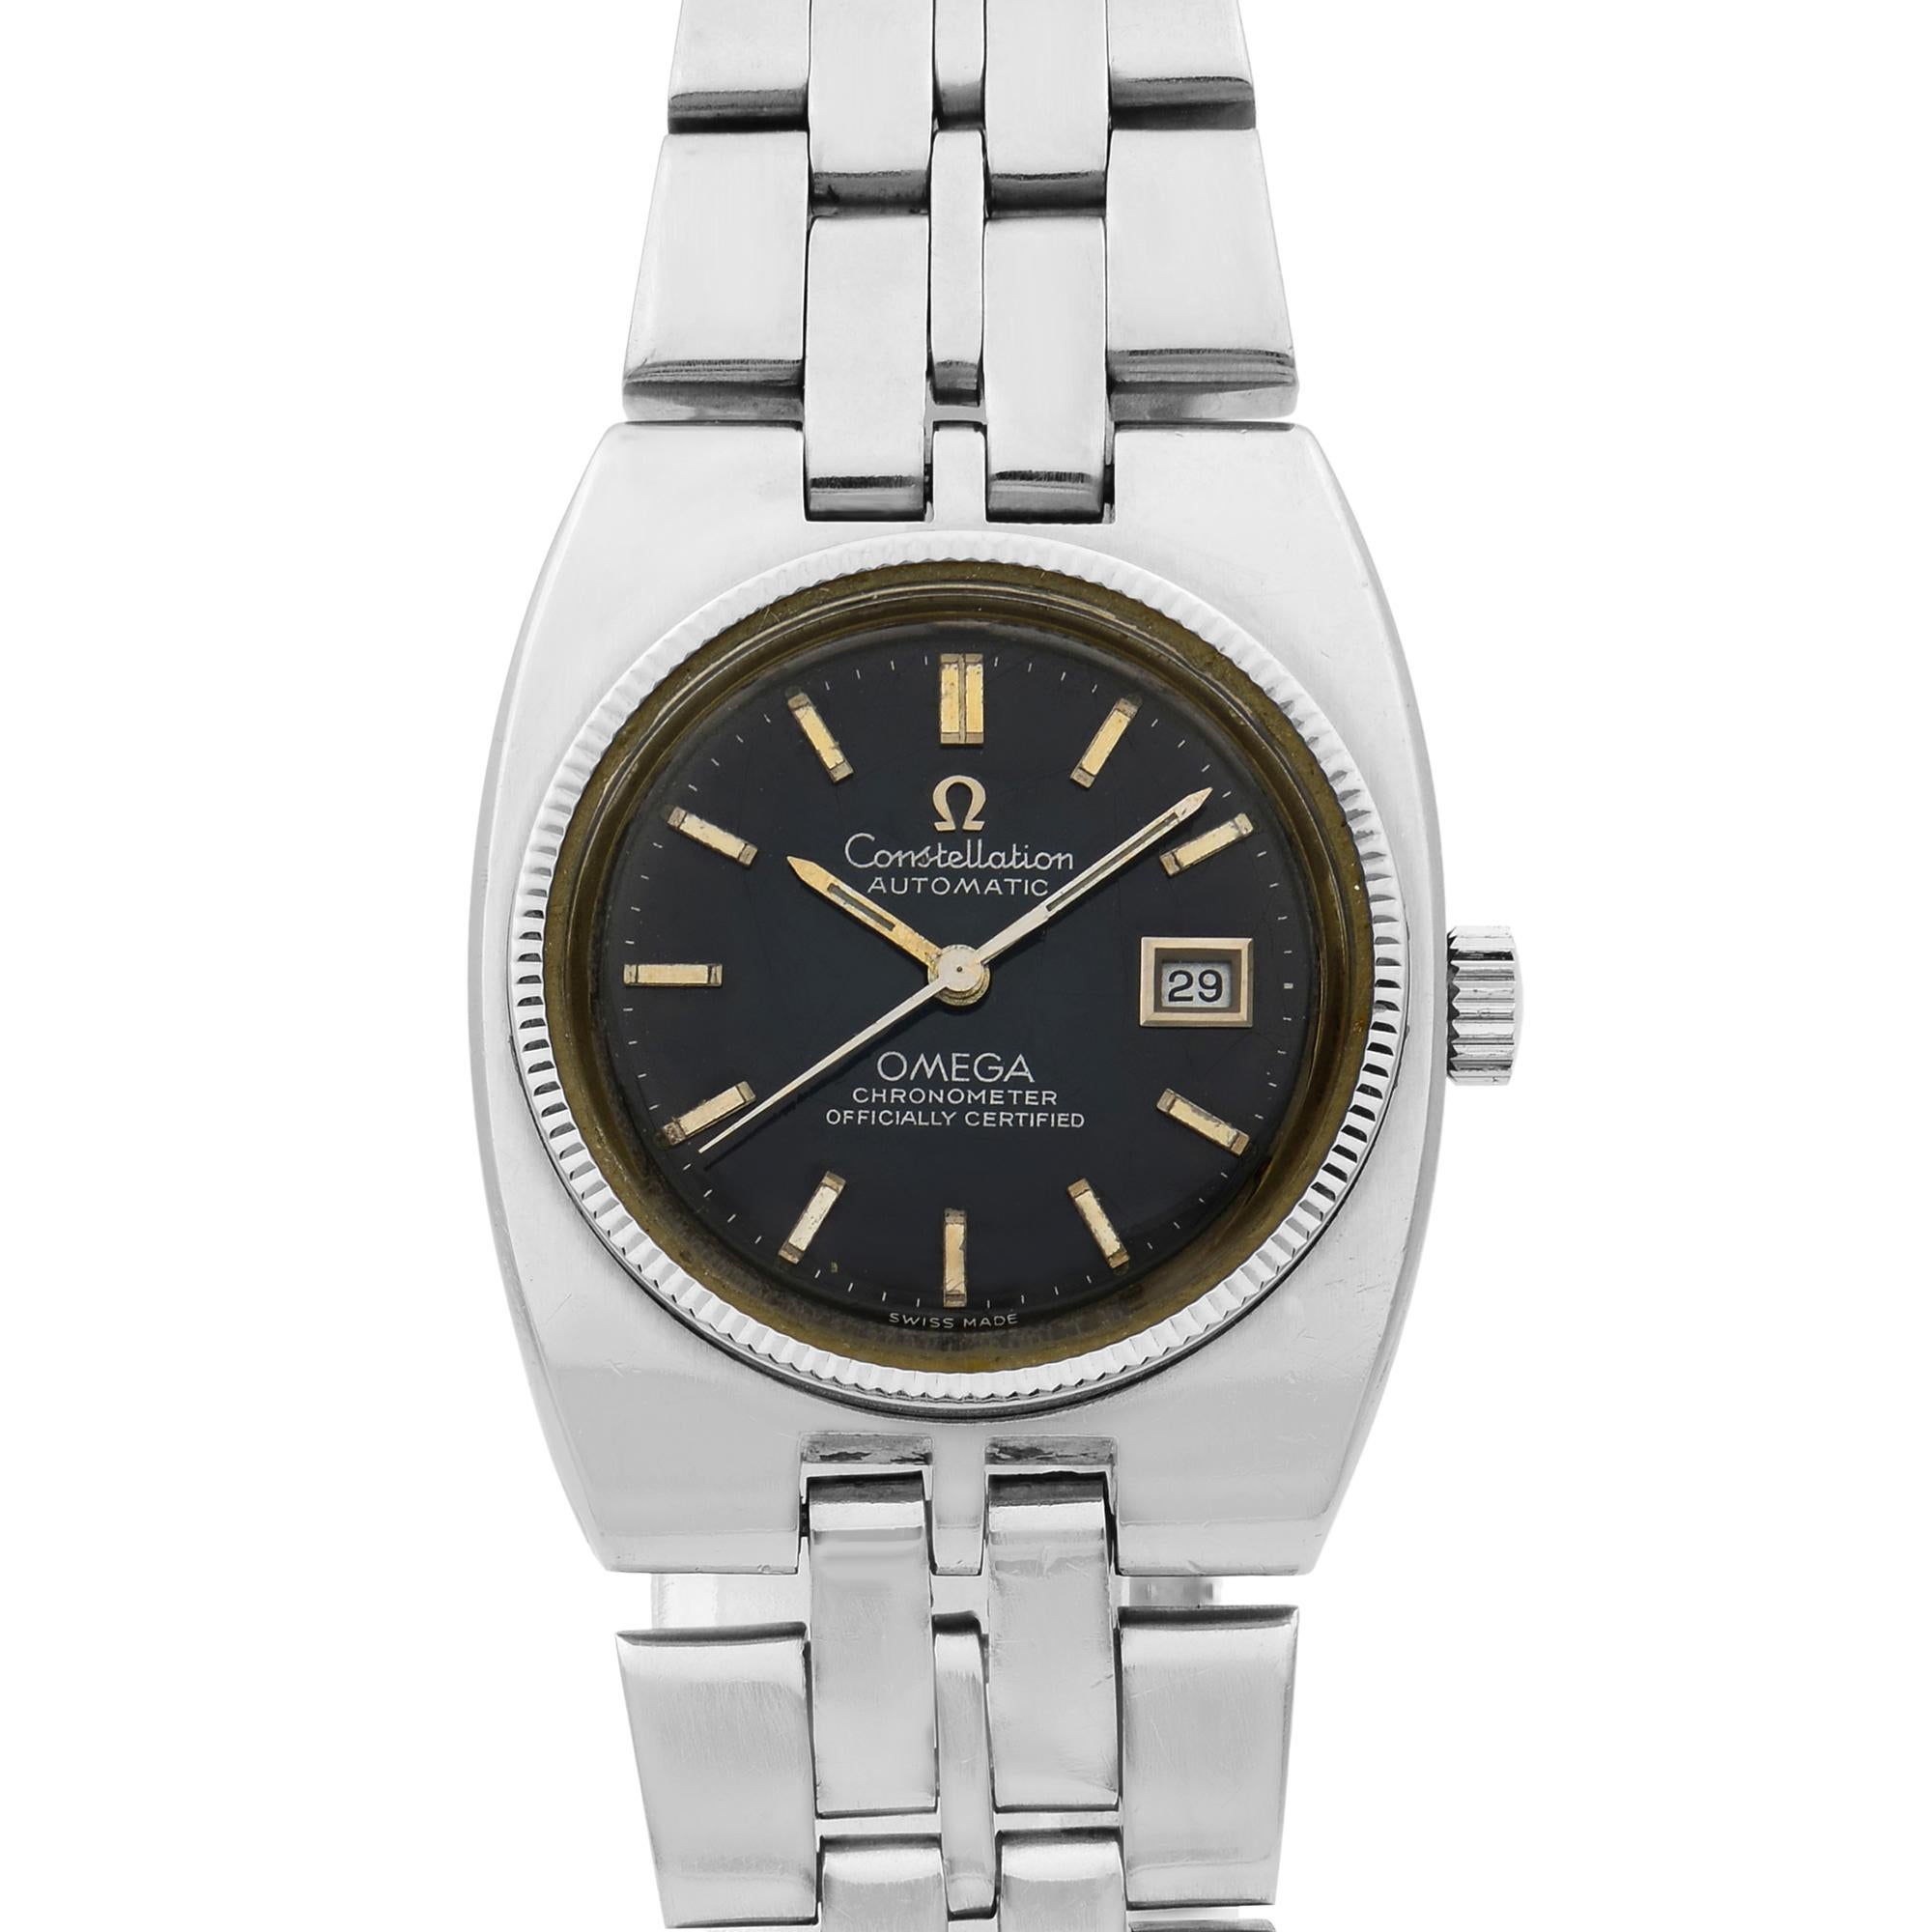 This pre-owned Omega Constellation 568.014 768.803 is a beautiful Ladie's timepiece that is powered by mechanical (automatic) movement which is cased in a stainless steel case. It has a round shape face, date indicator dial and has hand sticks style